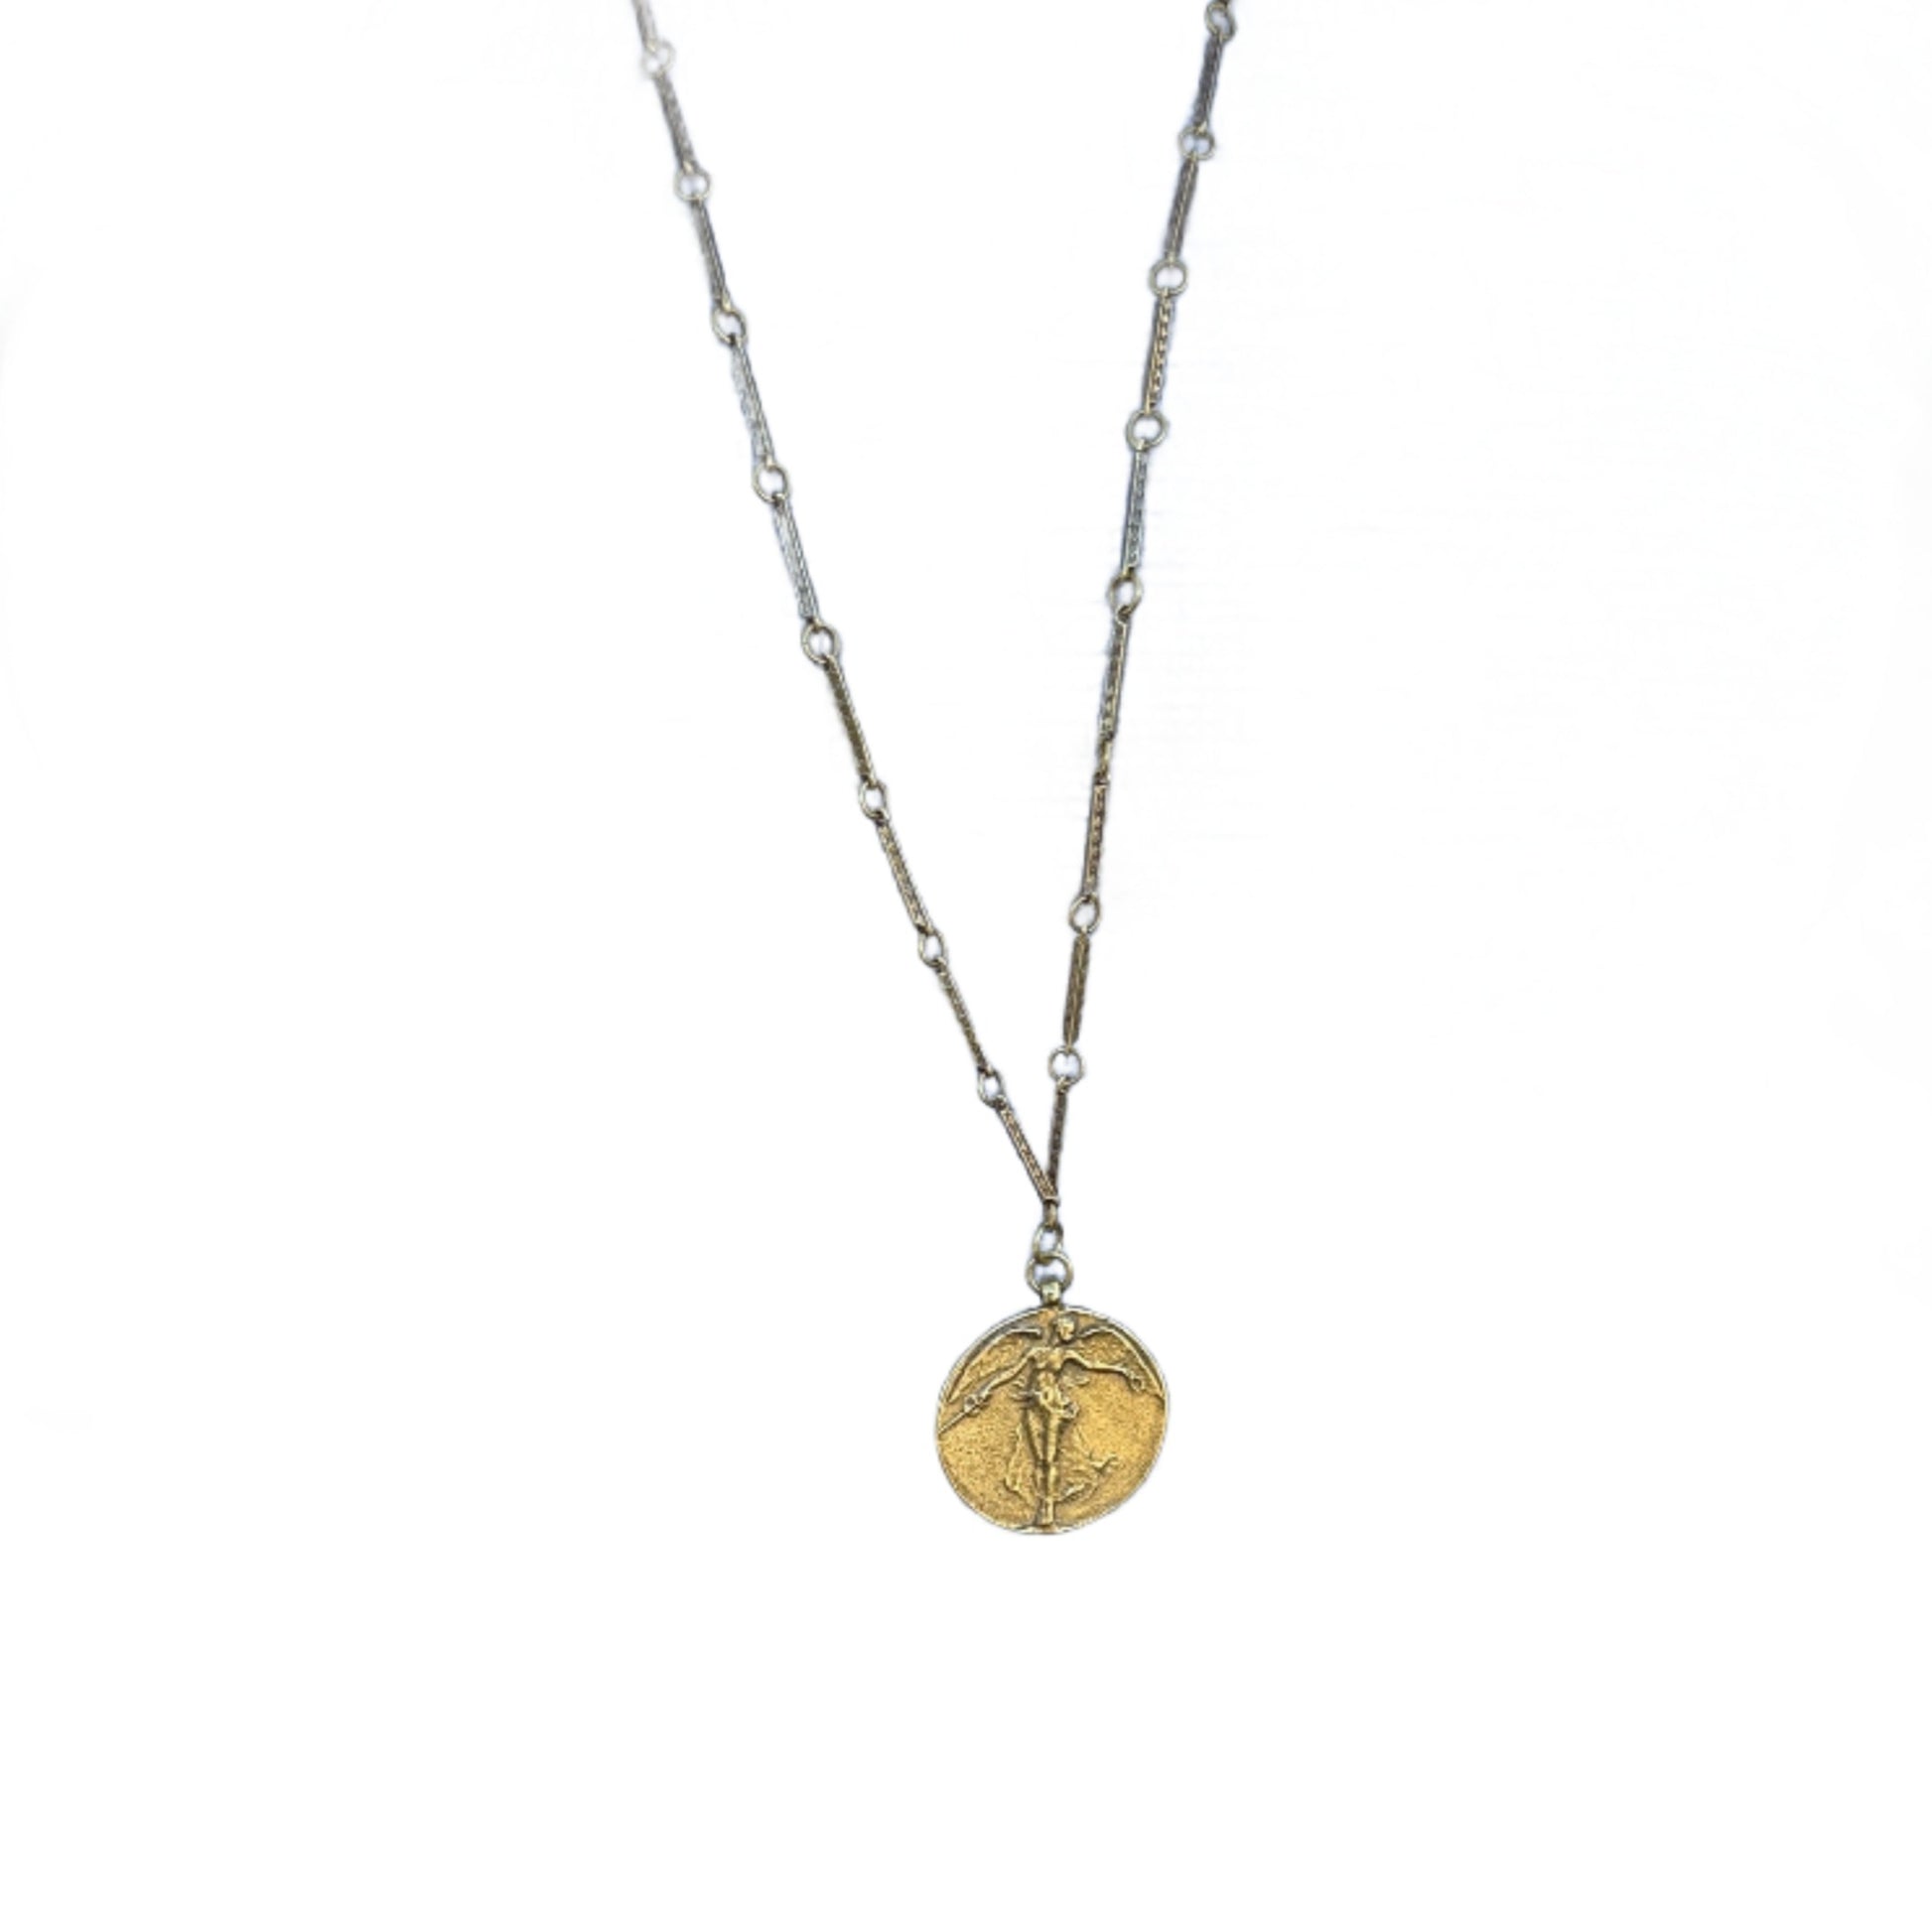 vintaged brass chain and liberty pendant  @dylanjamesjewelry.com